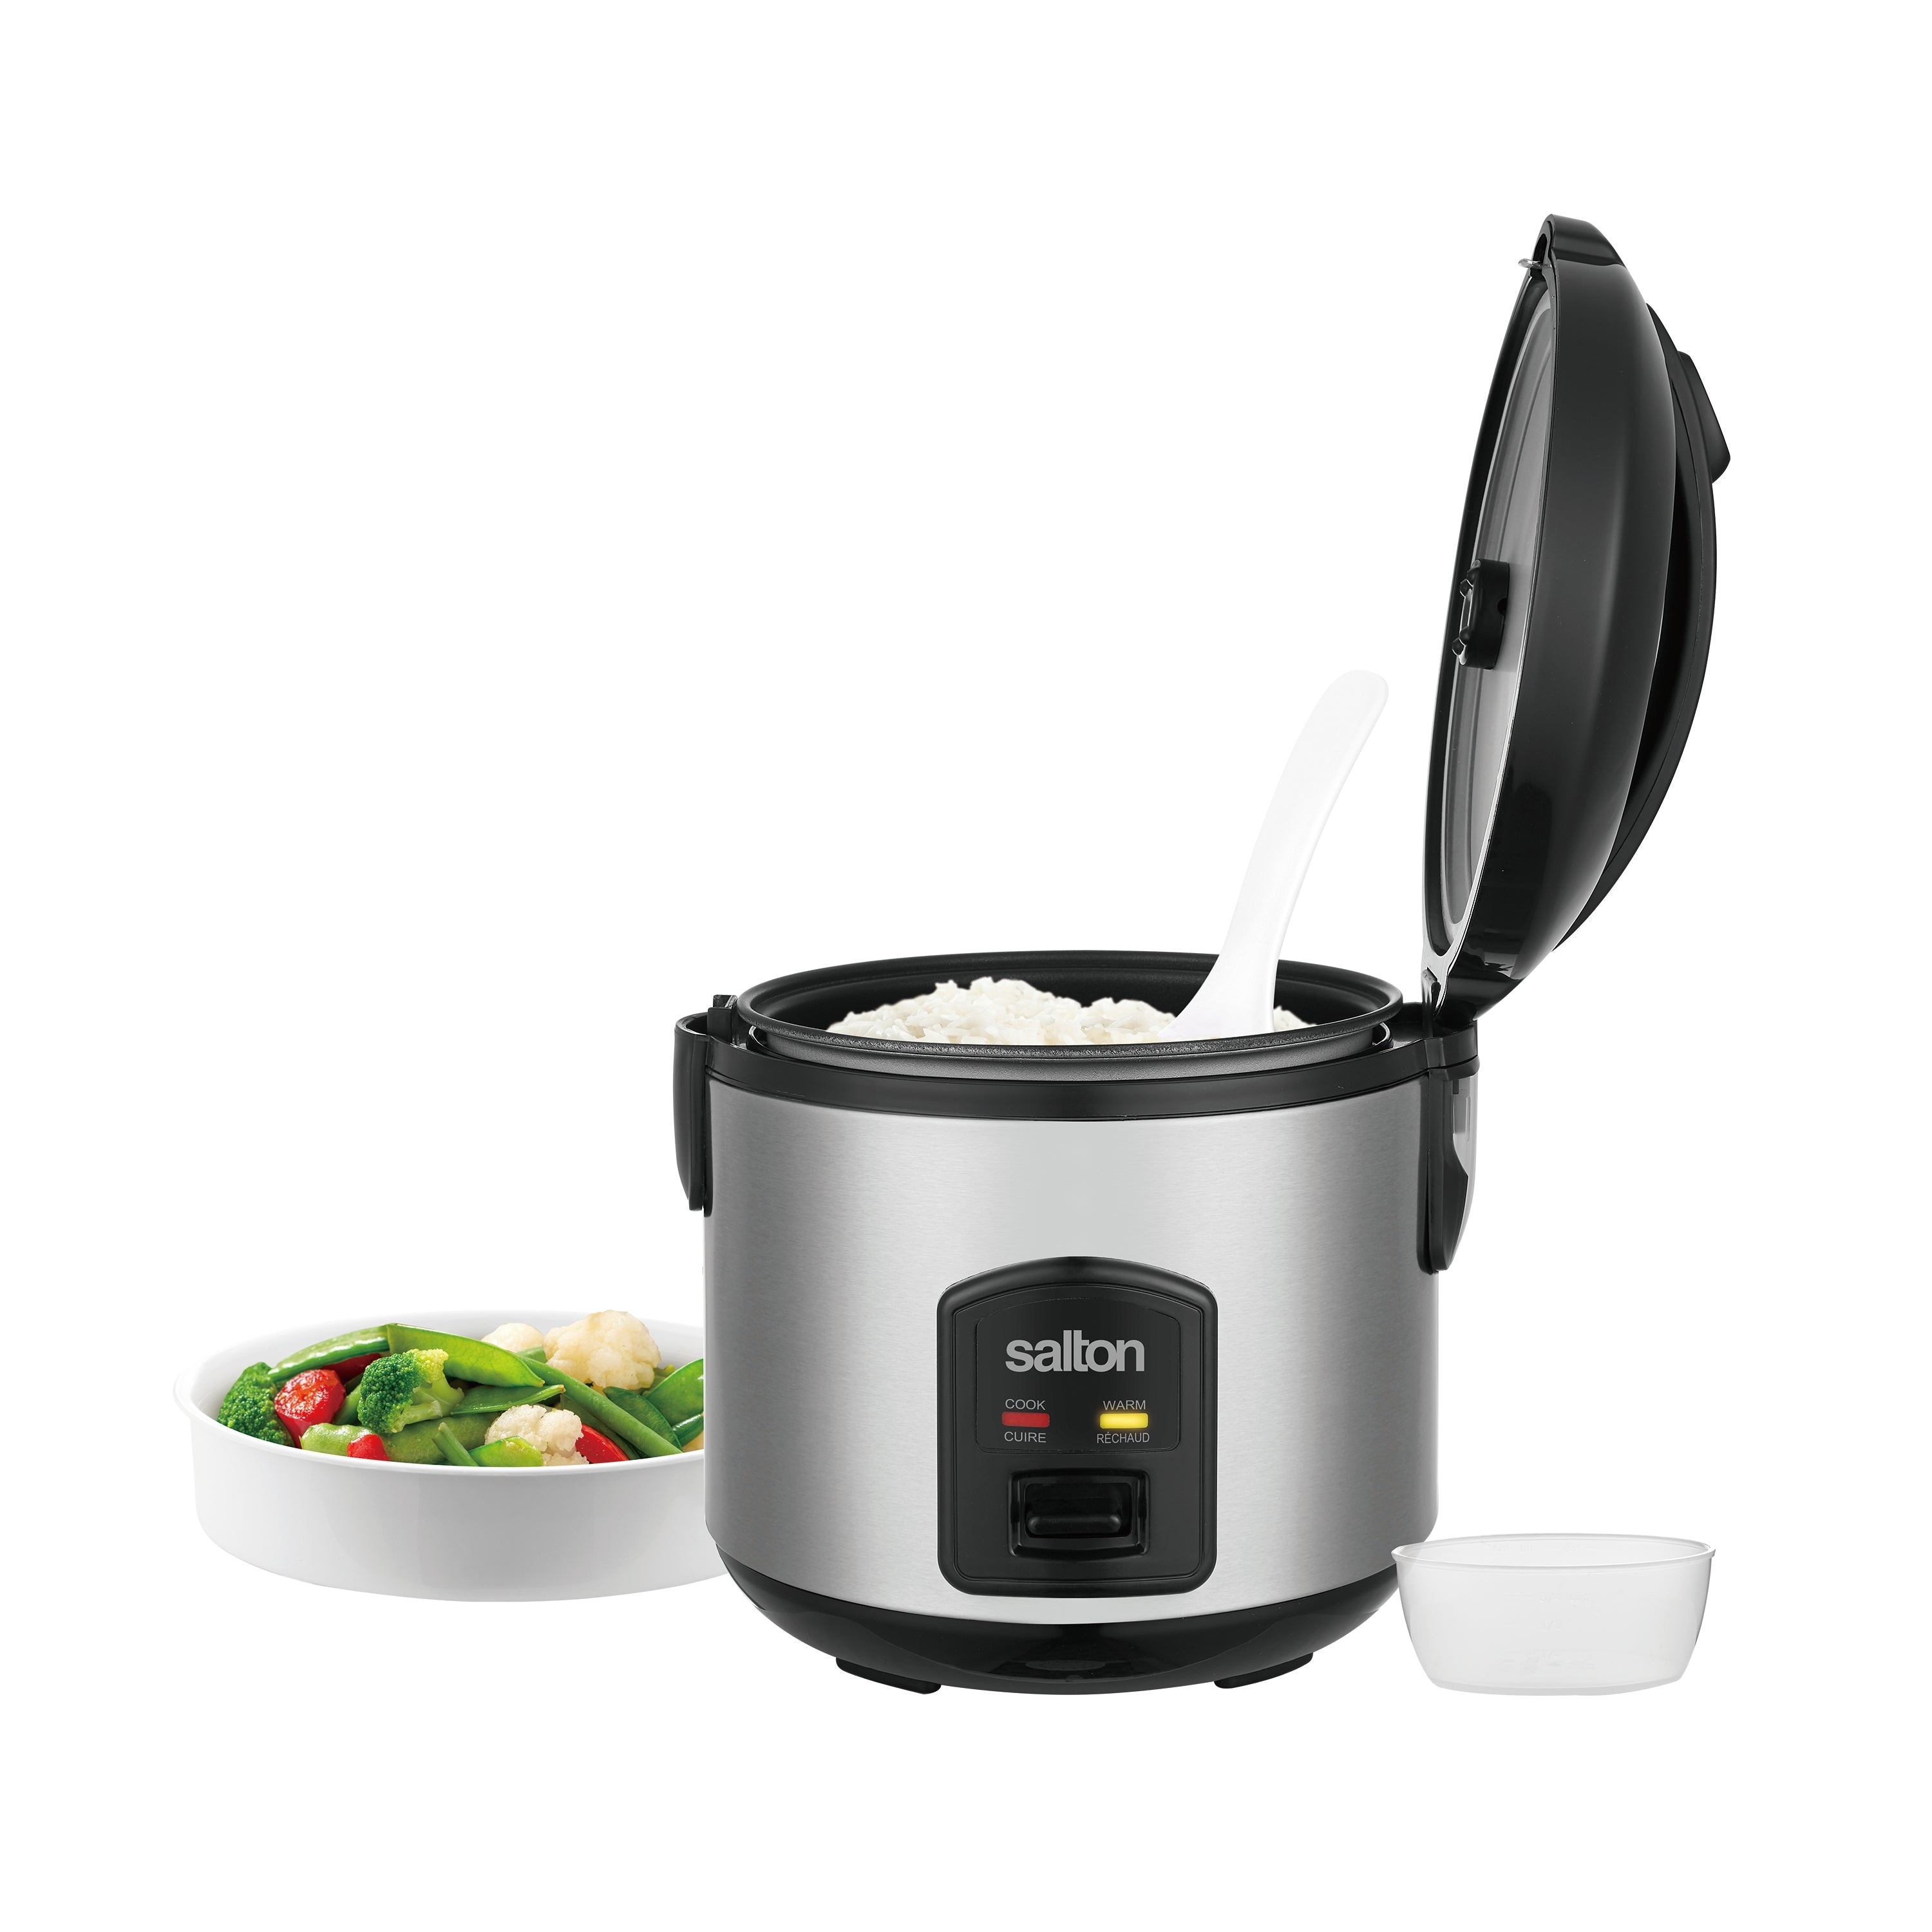 https://ak1.ostkcdn.com/images/products/is/images/direct/bfd3872508fc9c2cae07f1d01d4d350bcb65547c/Salton-Automatic-Rice-Cooker-%26-Steamer---8-Cup.jpg